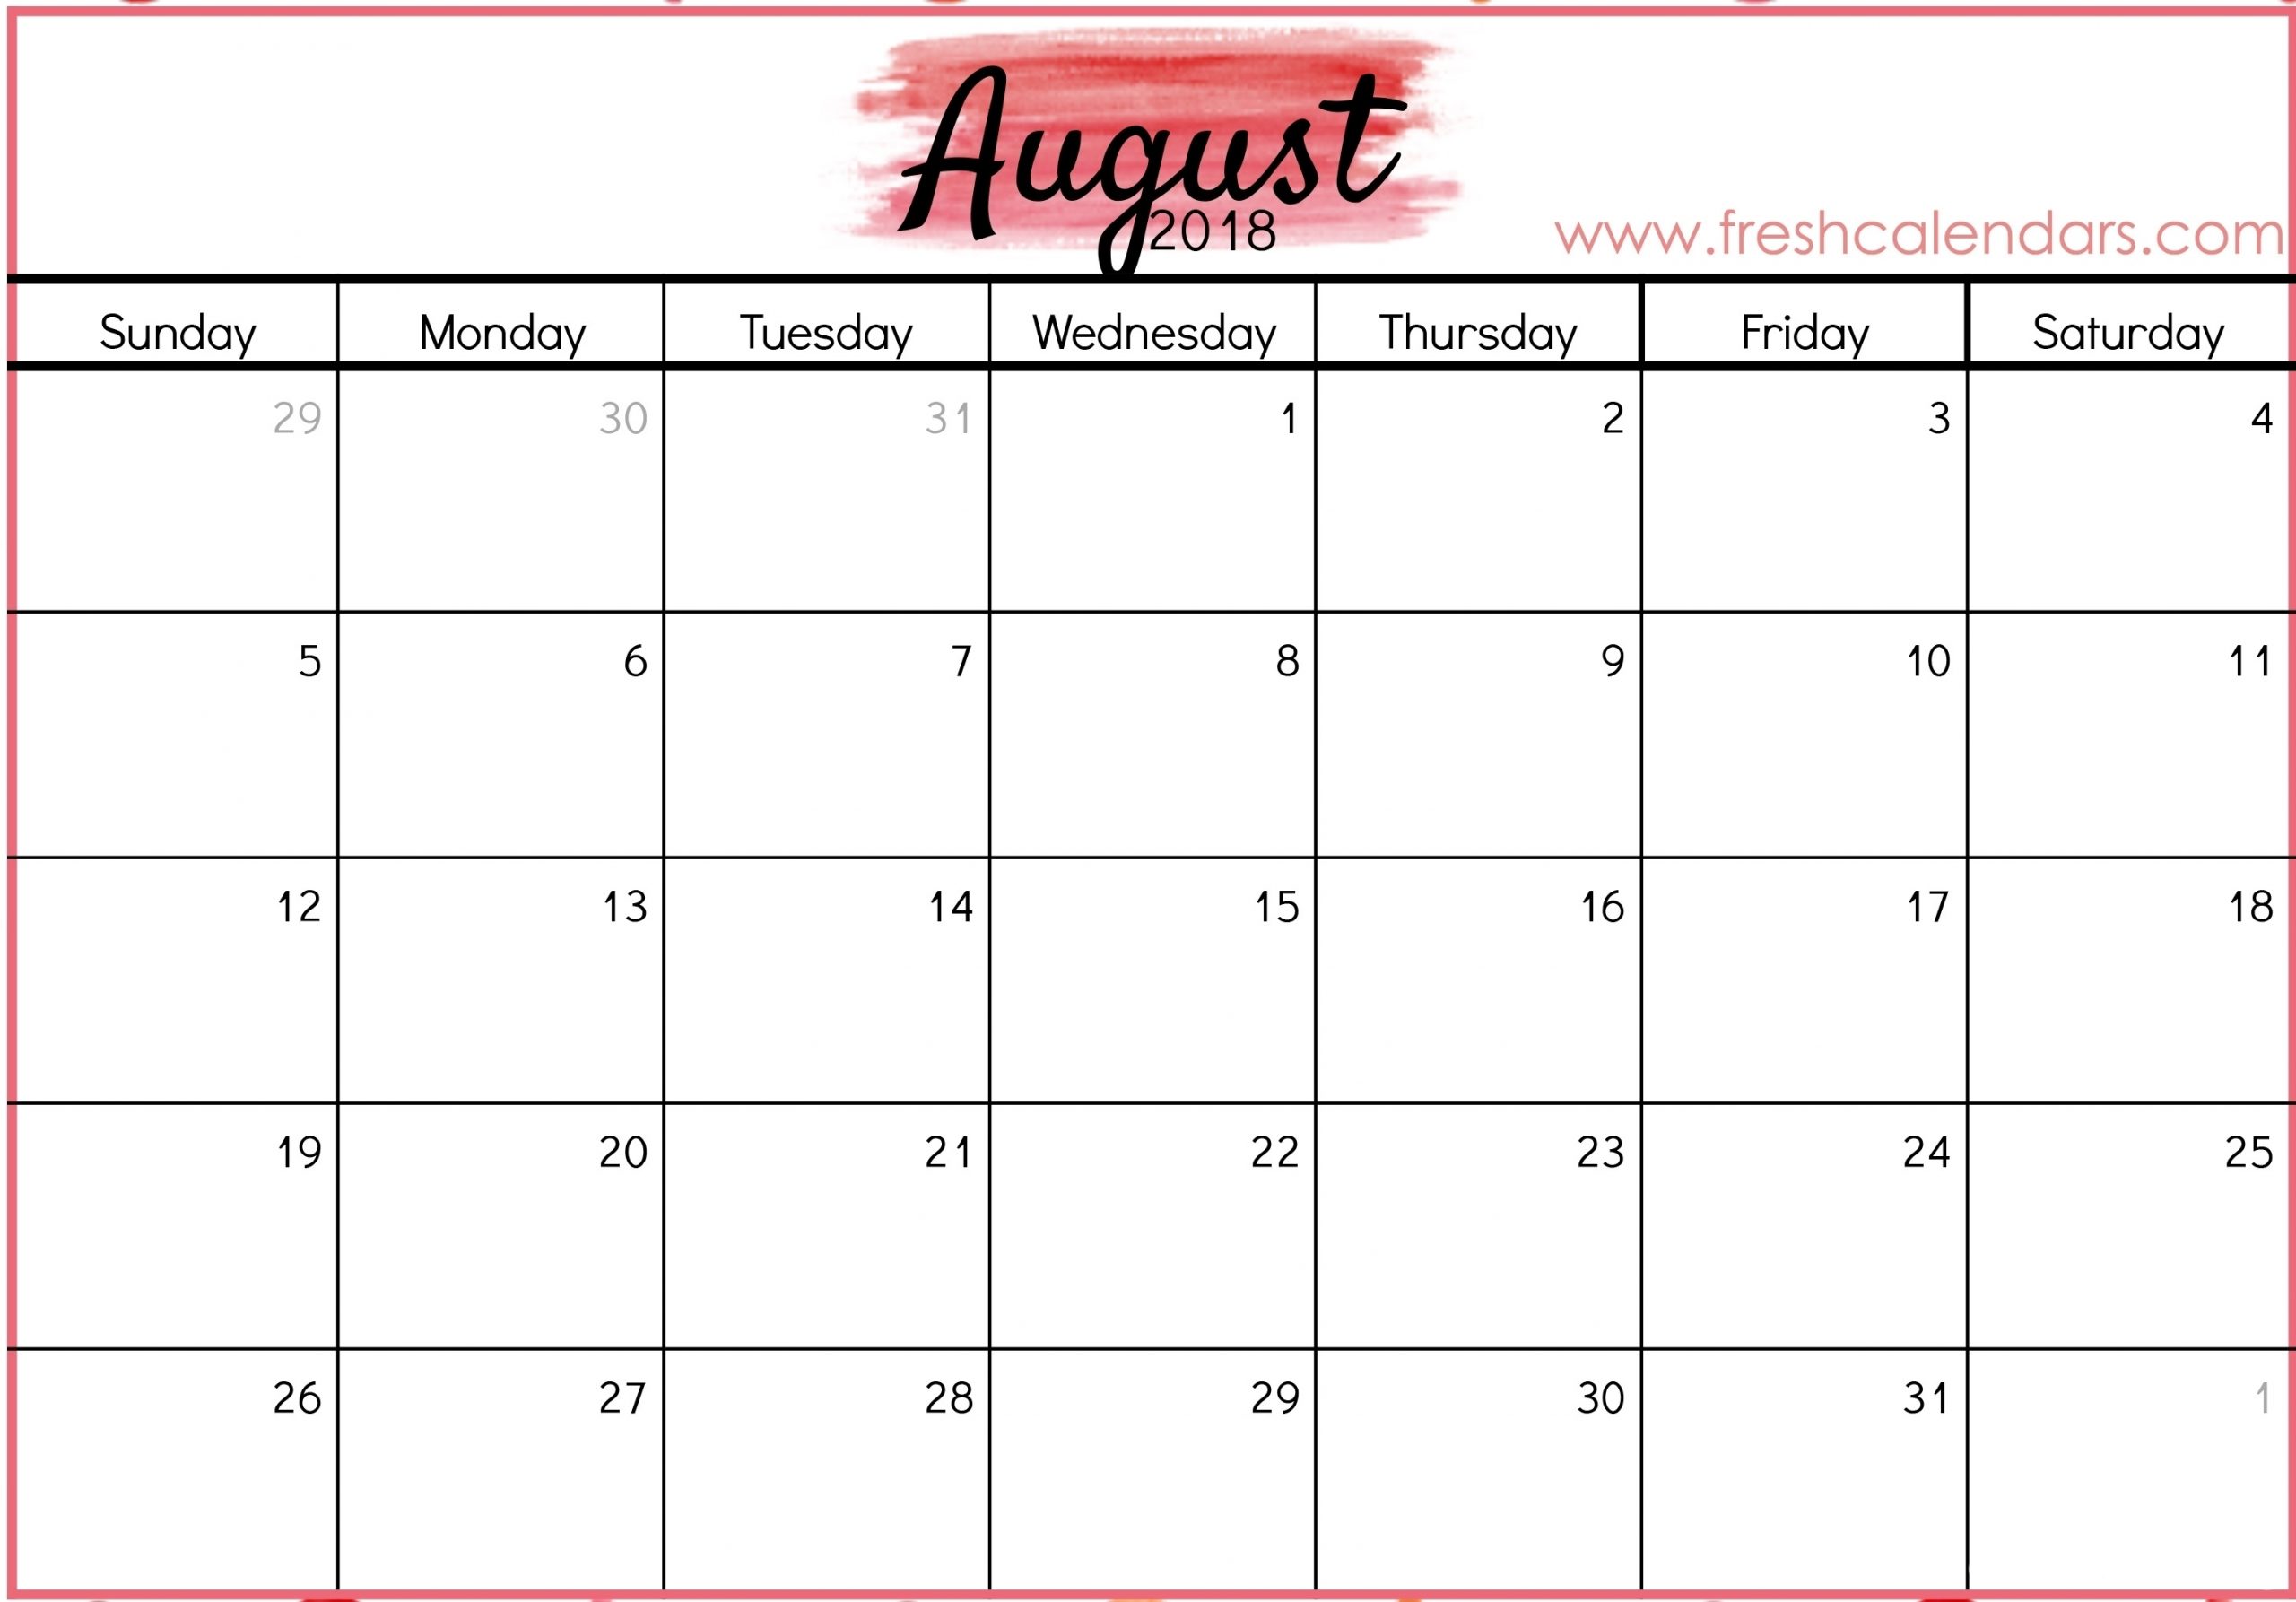 August 29 Hourly Schedule Template | Template Calendar Printable with August 29 Hourly Schedule Template